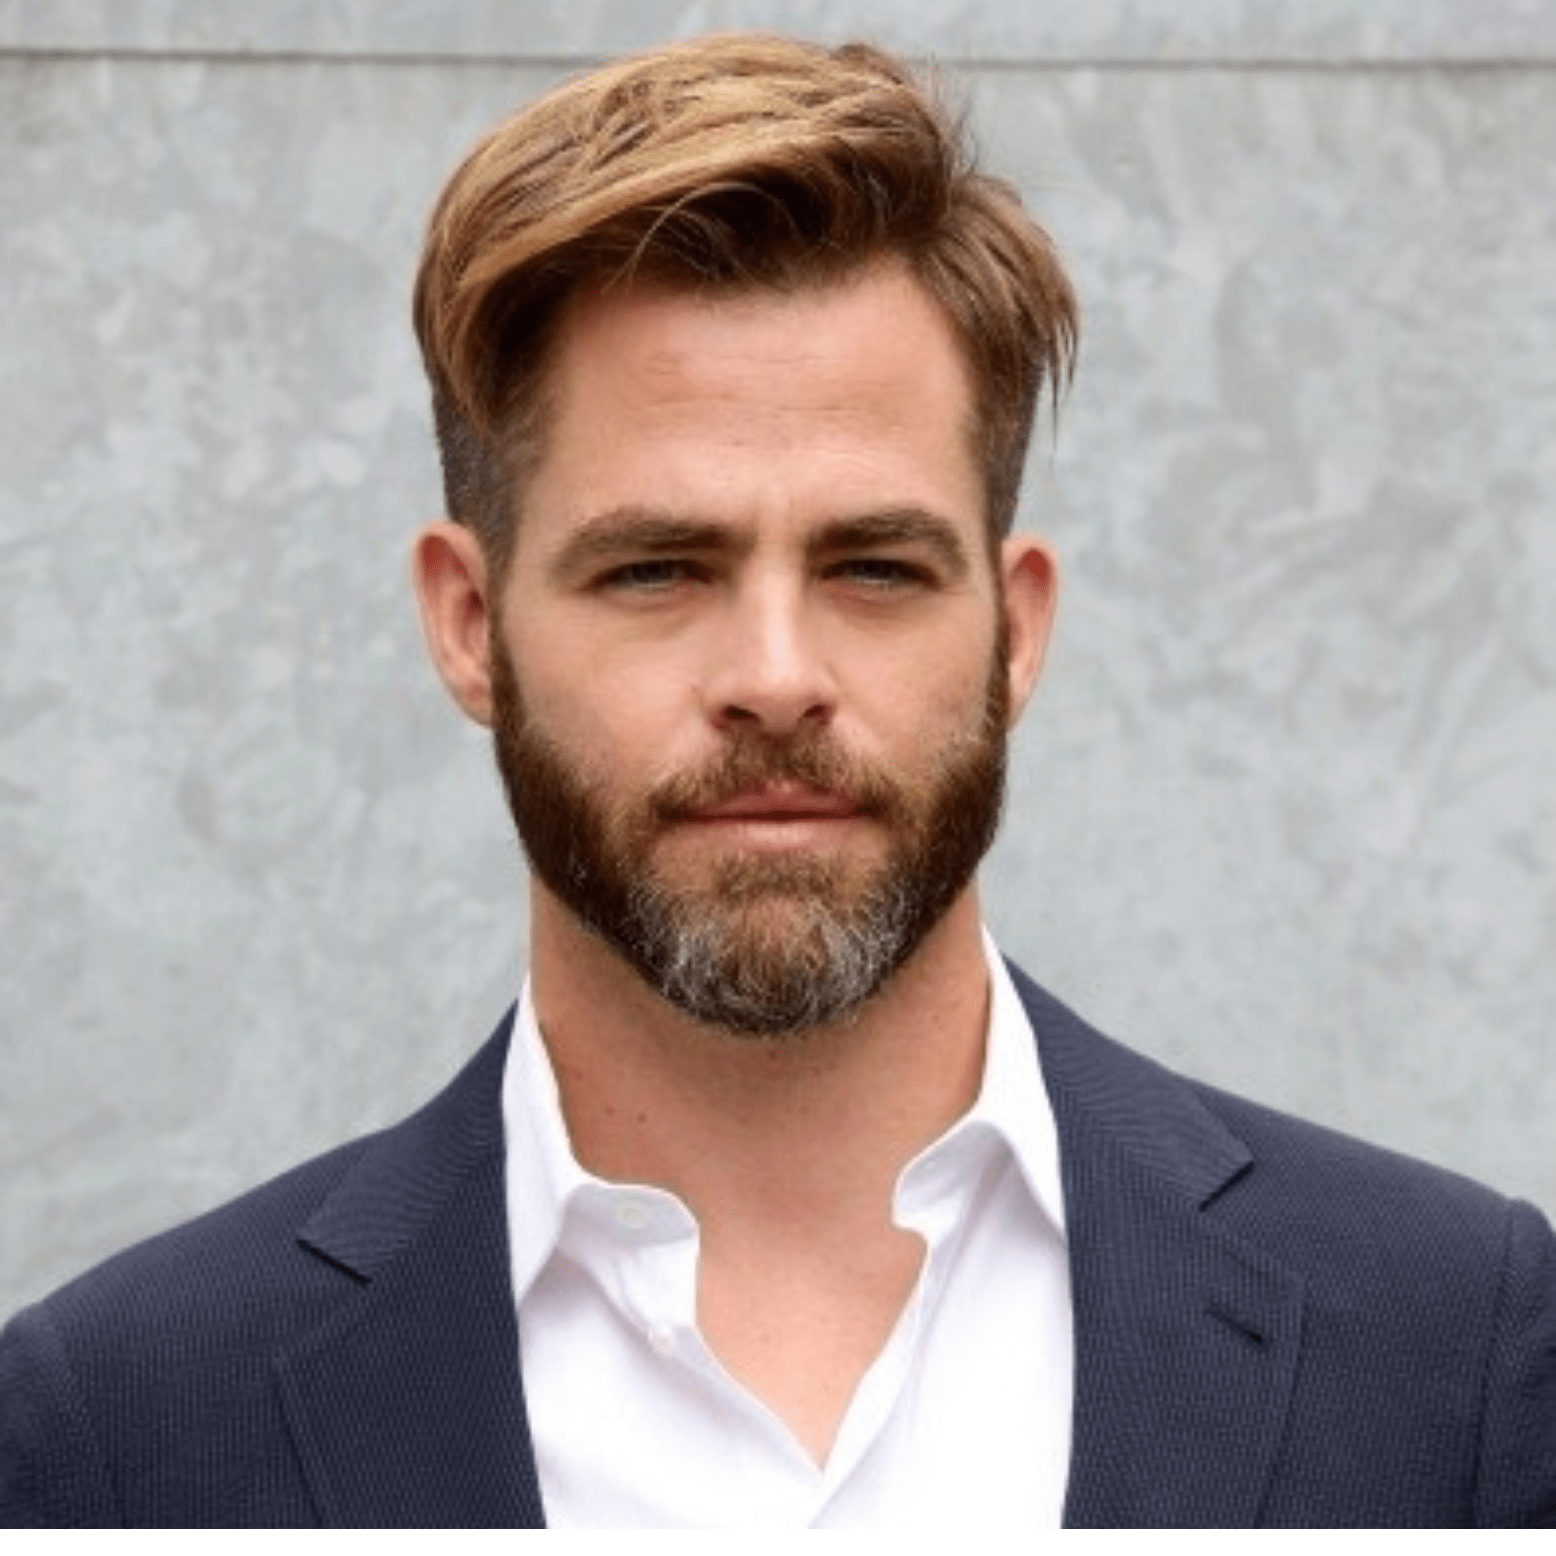 Chris Pine in the white dress shirt pair with blue coat while looking towards camera